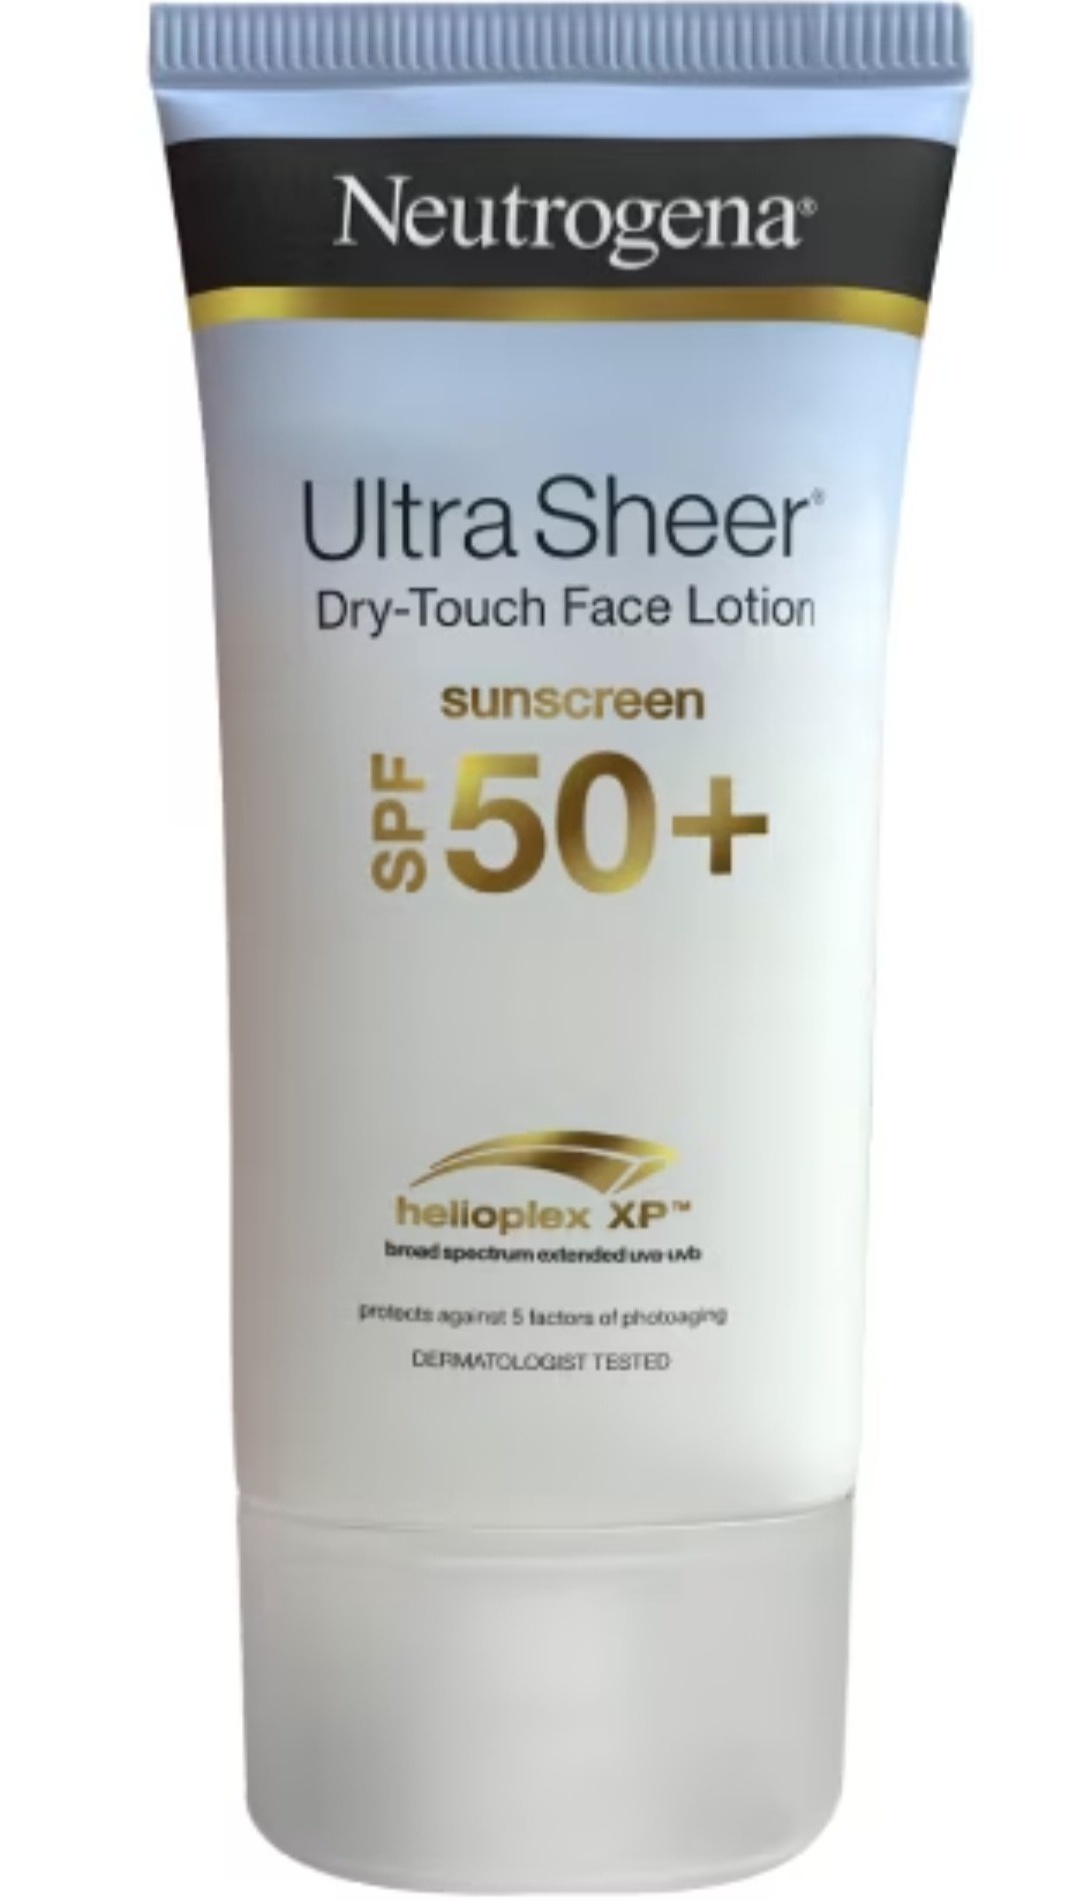 Neutrogena ® Ultra Sheer Dry-touch Face Lotion Sunscreen SPF50 Pa++++